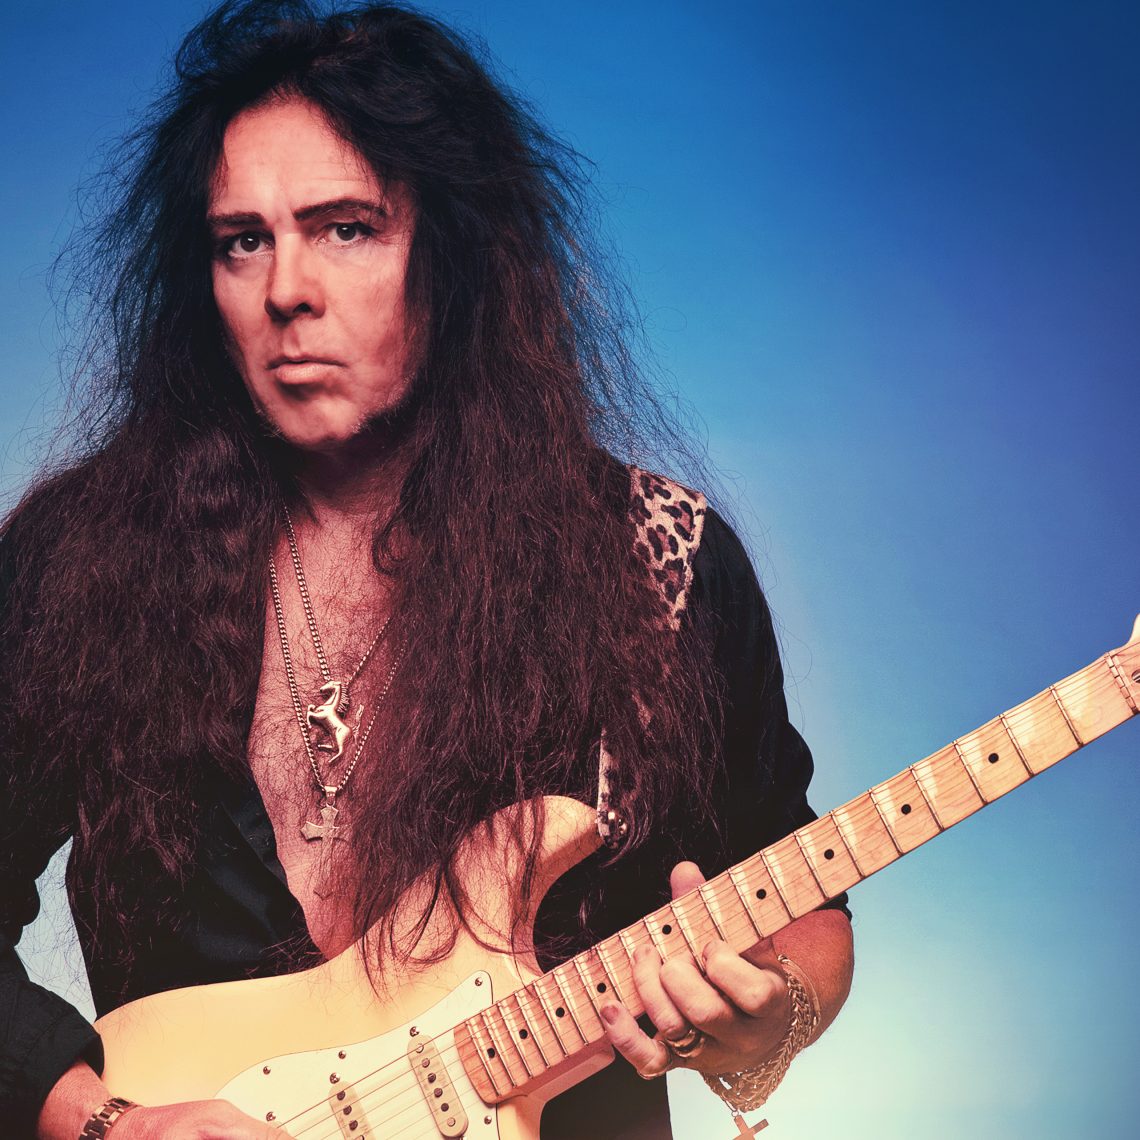 Yngwie Malmsteen To Release New Album ‘Blue Lightning’ On March 29th Via Mascot Records/Mascot Label Group